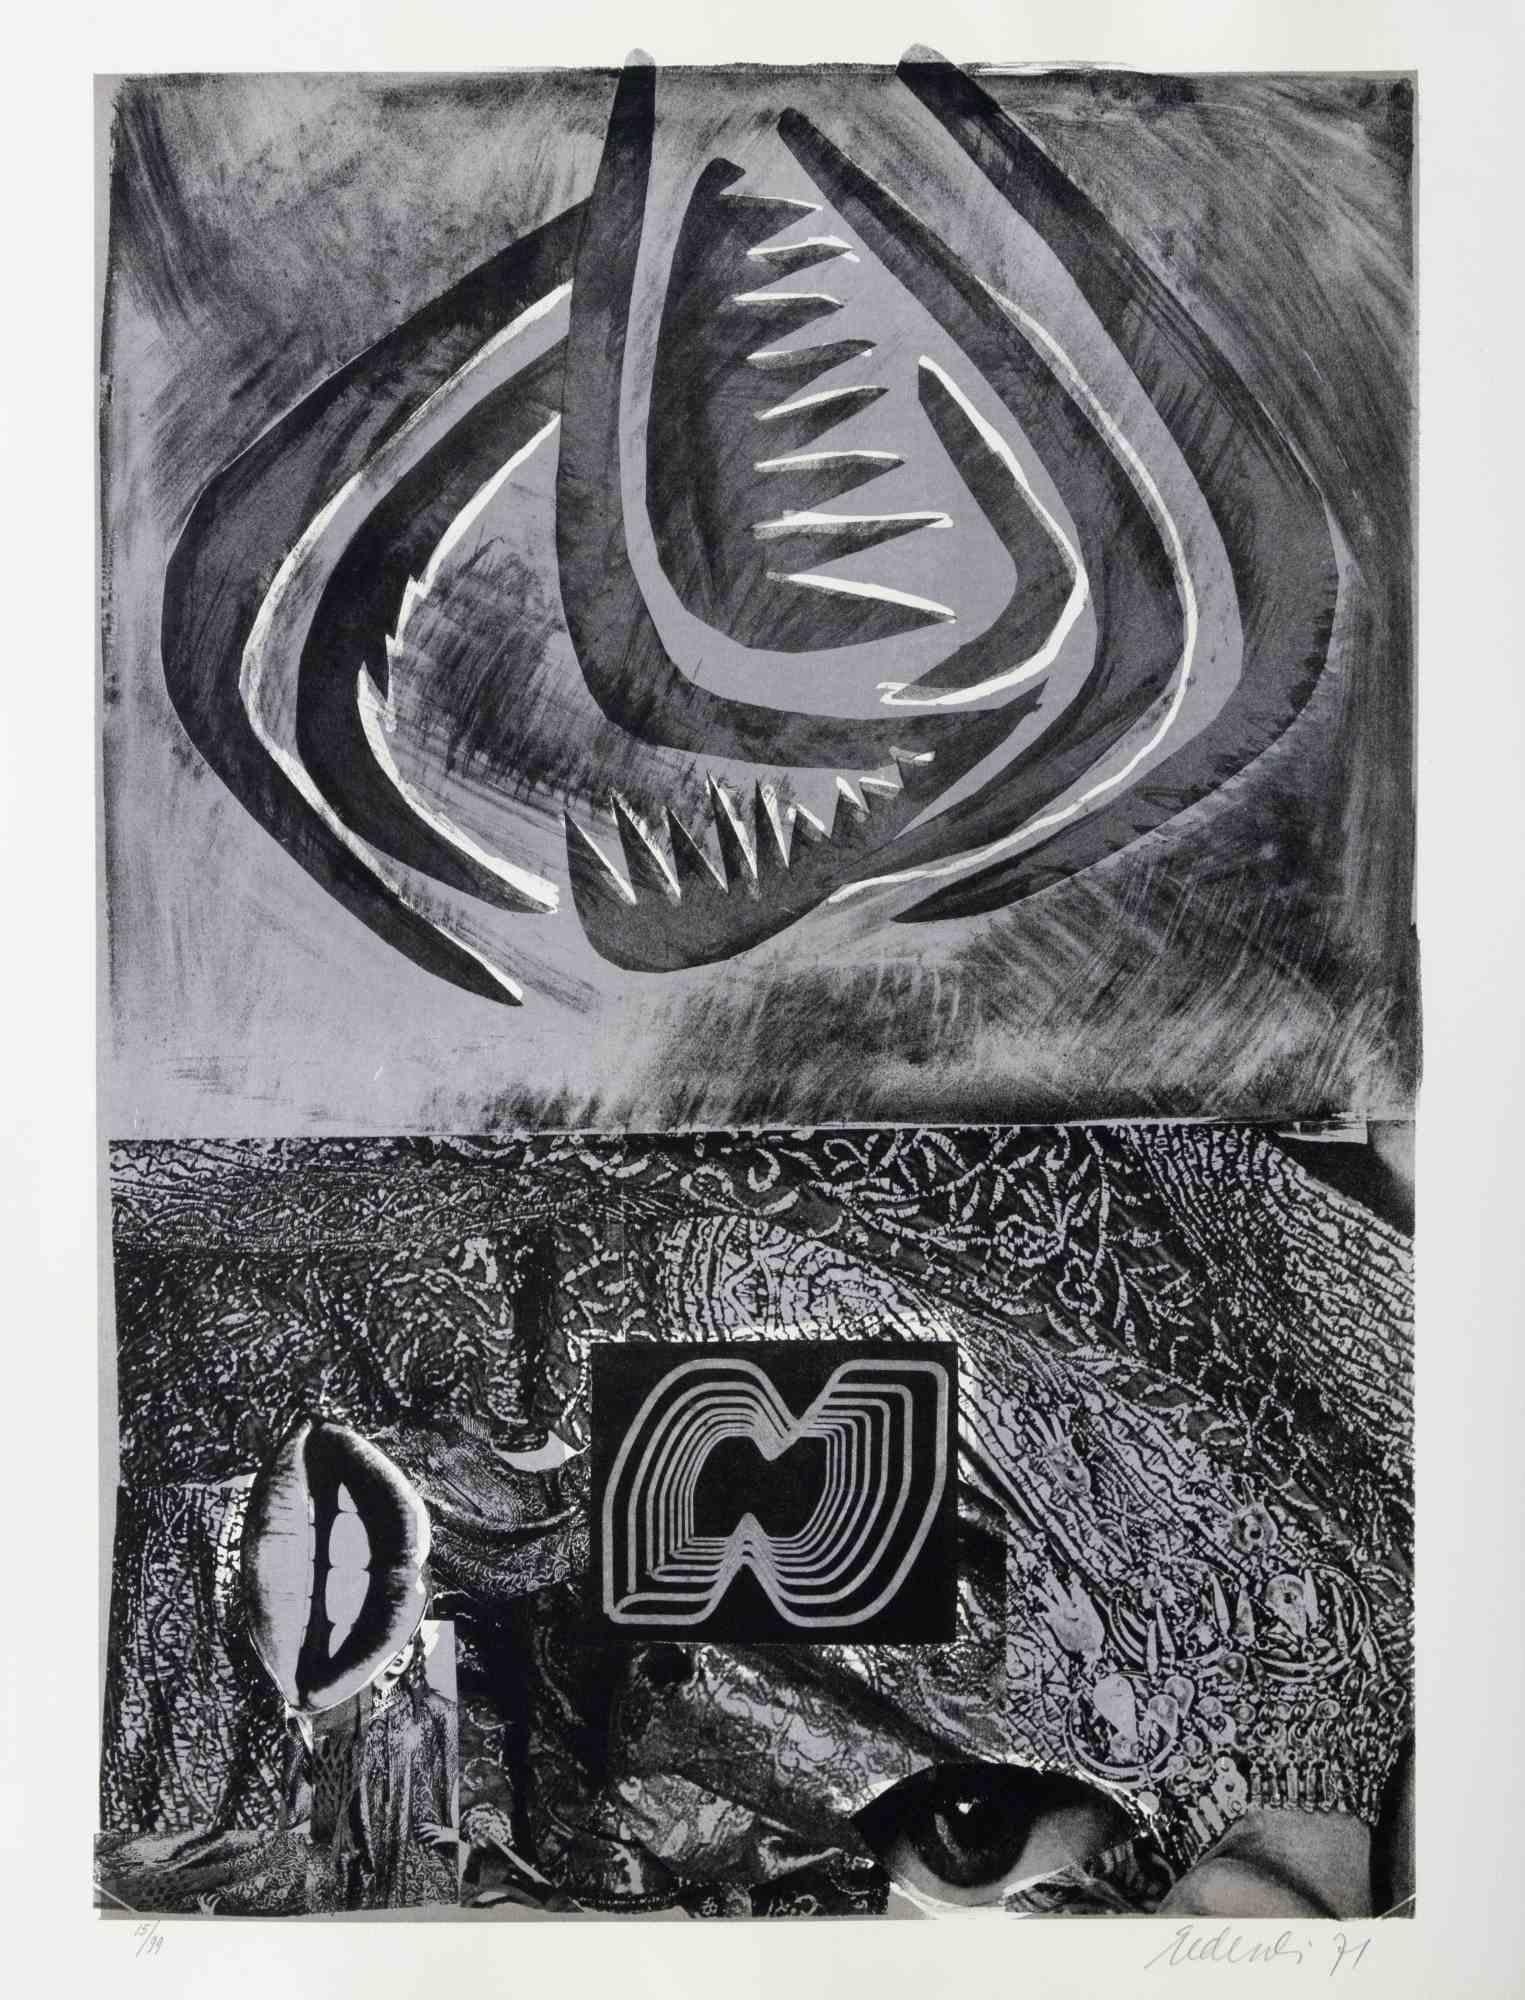 Tribal is a contemporary artwork realized by Nani Tedeschi in 1971.

Black and white lithograph.

Hand signed and dated on the lower margin.

Numbered on the lower margin.

Edition of 15/99.